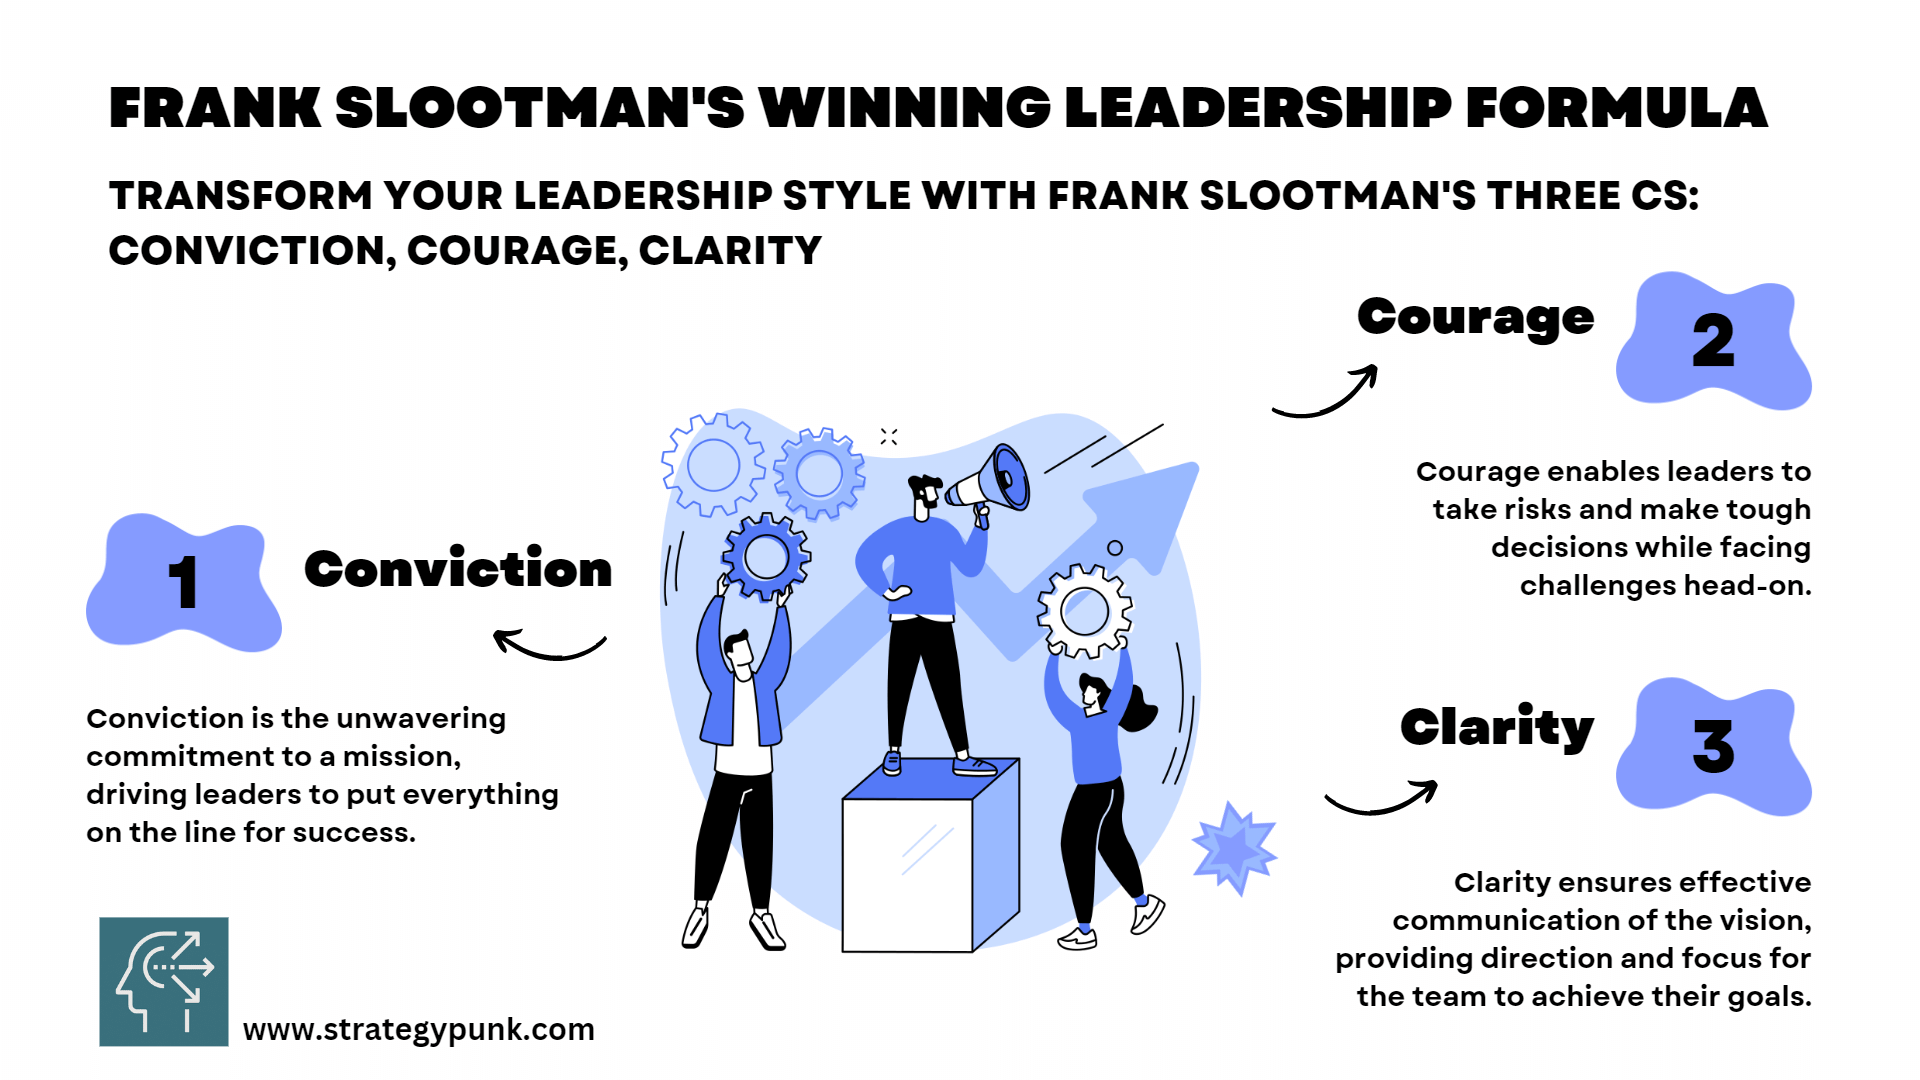 Transform Your Leadership Style with Frank Slootman's Three Cs: Conviction, Courage, Clarity